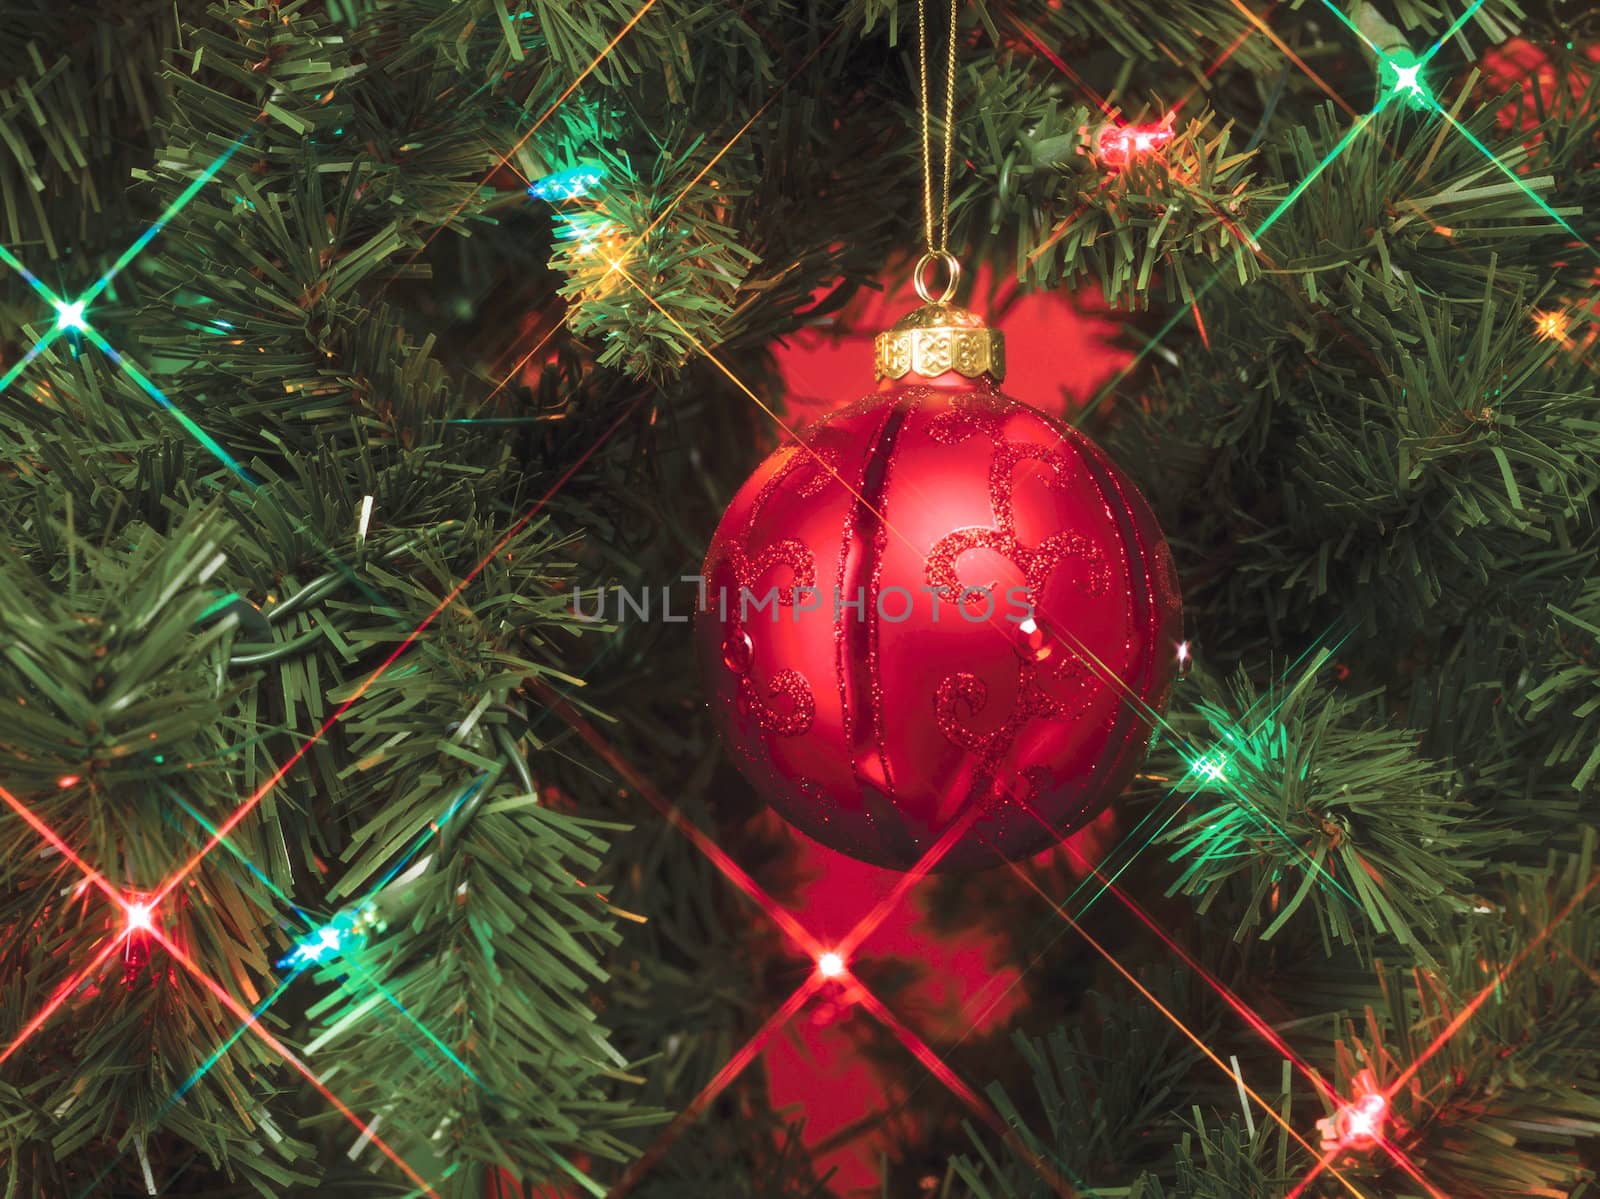 Shining lights and bauble on a Christmas tree